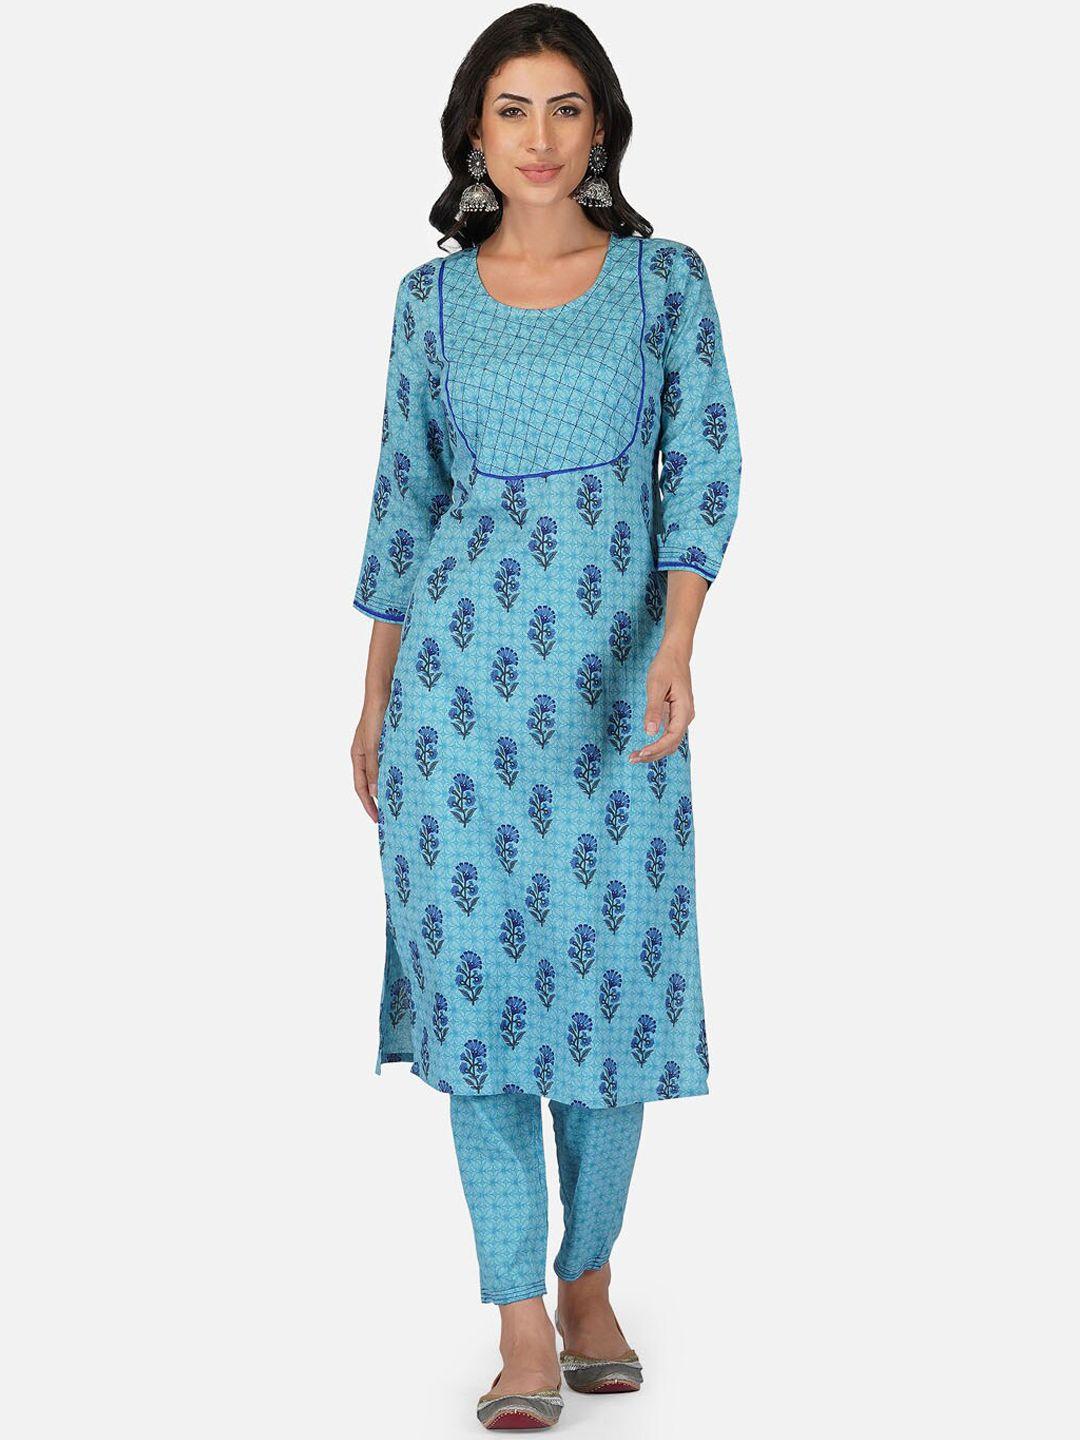 aarti fashion women floral printed kurta with trousers